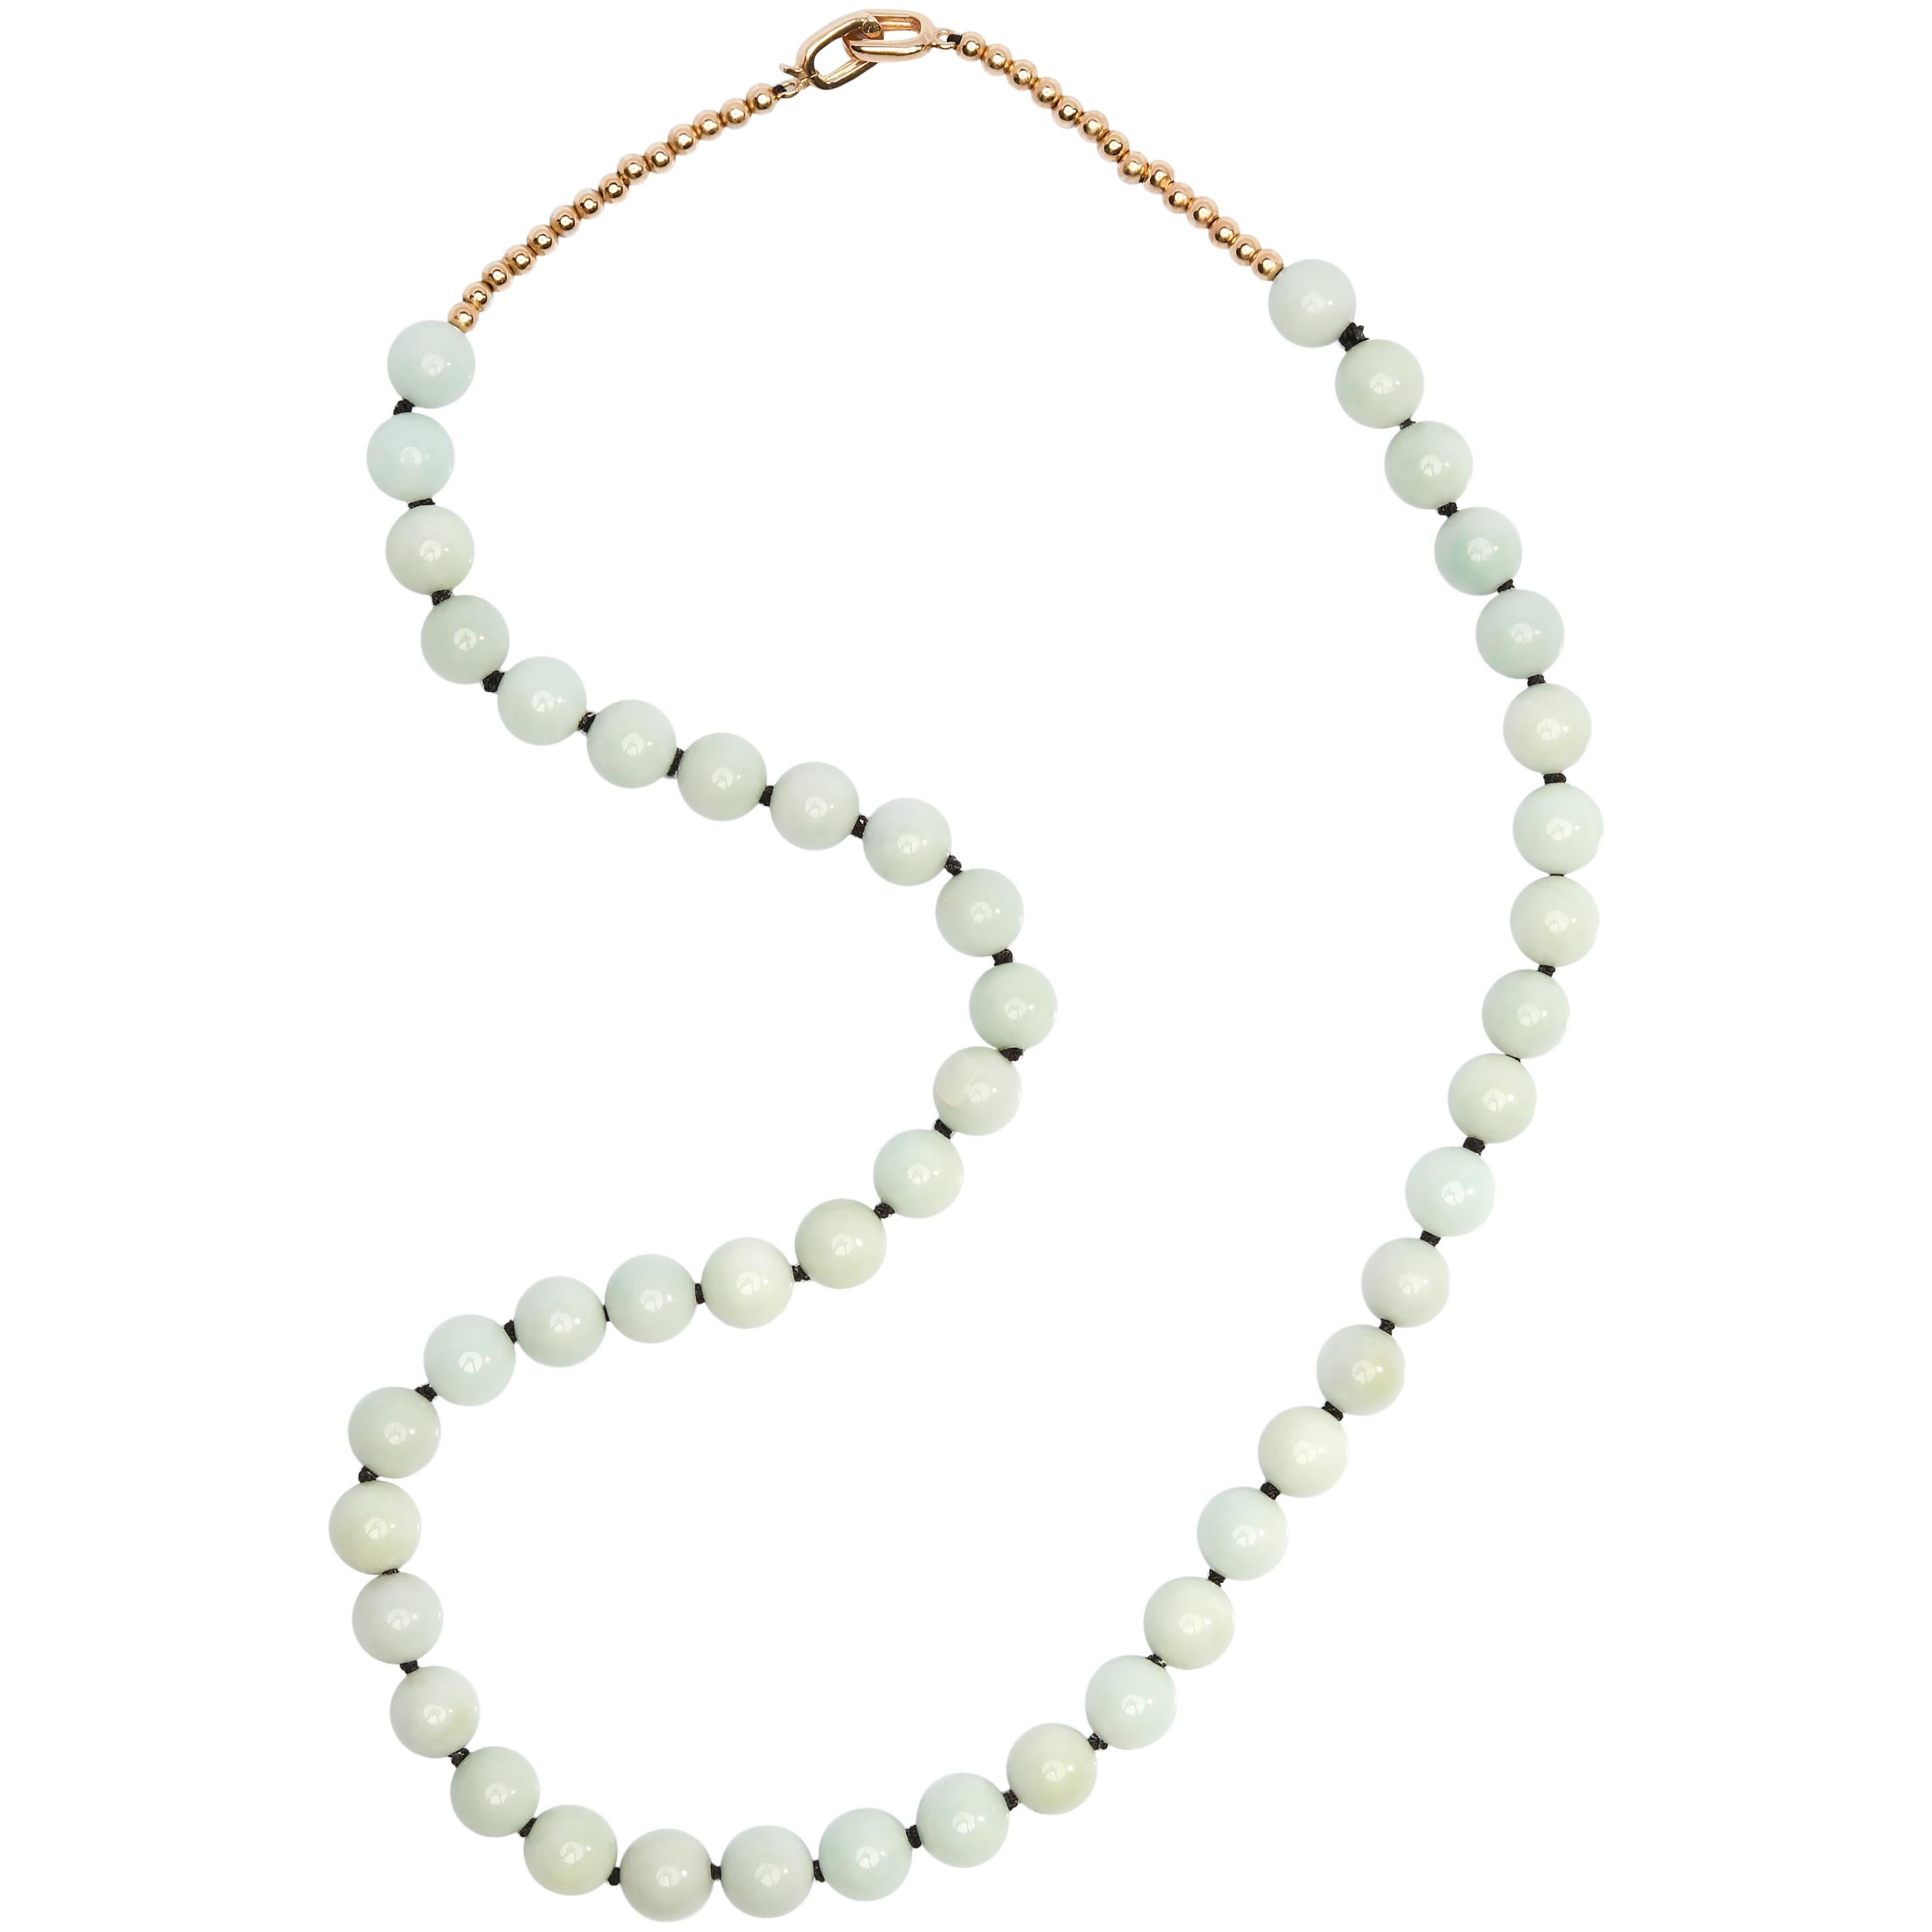 Jade Necklace of Soft Bluish-Green Jadeite is Unexpectedly Sublime